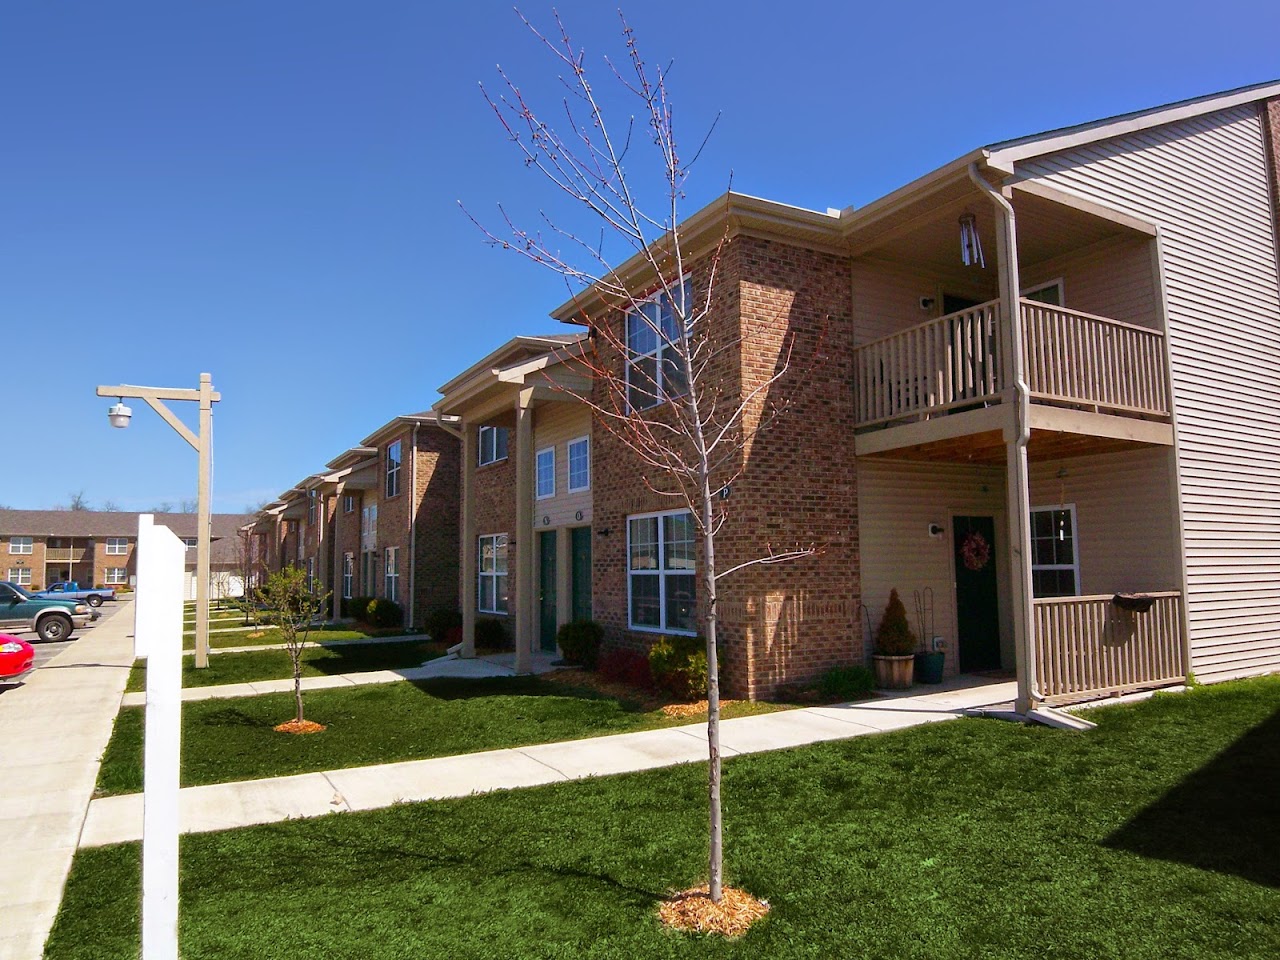 Photo of MAPLE TREE APTS I. Affordable housing located at 1405 W 18TH ST LA PORTE, IN 46350